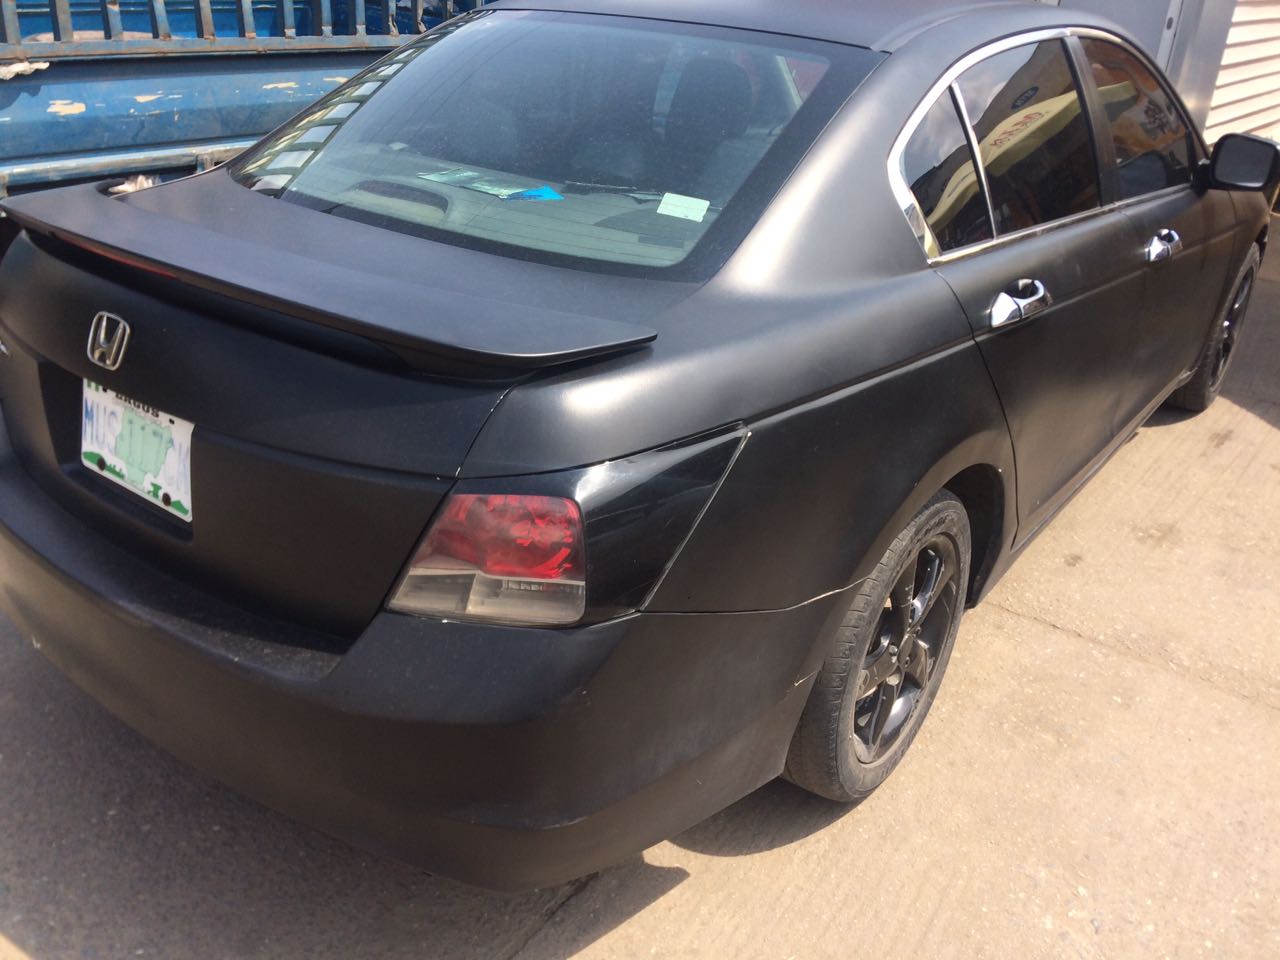 Sold! Sold!! Sold!!! Reg. Honda Accord 2008 For Sale Now @ 1.6m  Autos